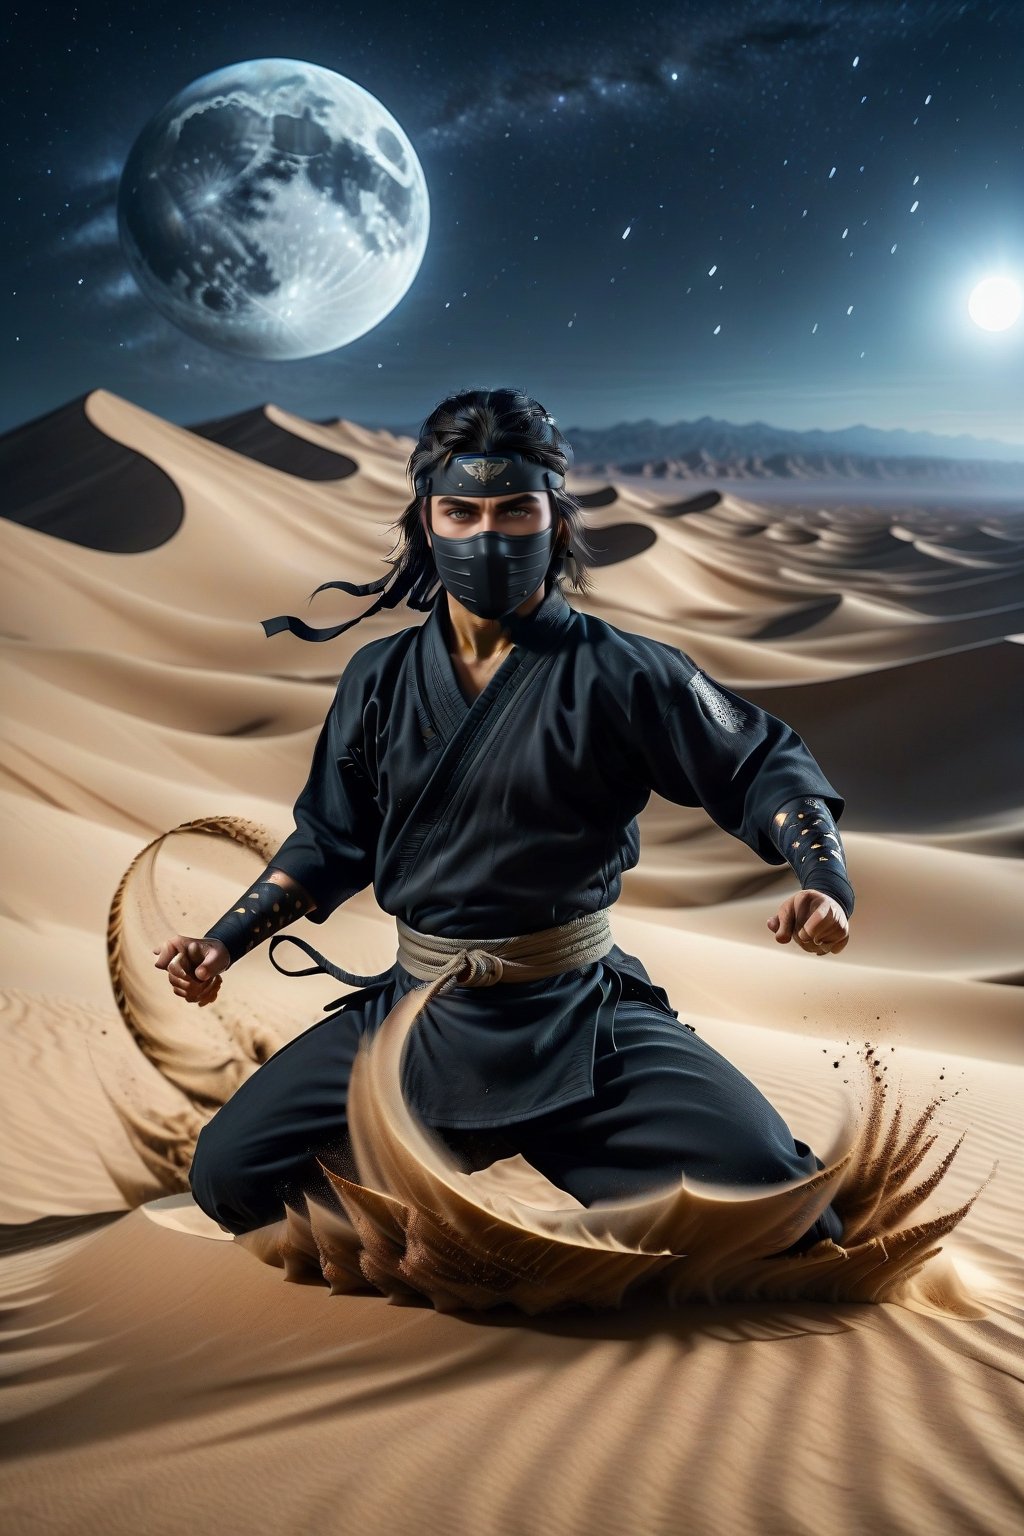 A ninja performing Earth-style ninjutsu in the desert at night. The scene is illuminated by the moon and stars, casting long shadows and highlighting the ninja's focused expression. Sand and rocks are levitating around the ninja, caught in the act of manipulation. The desert landscape is visible in the moonlight, adding a mysterious atmosphere to the scene.